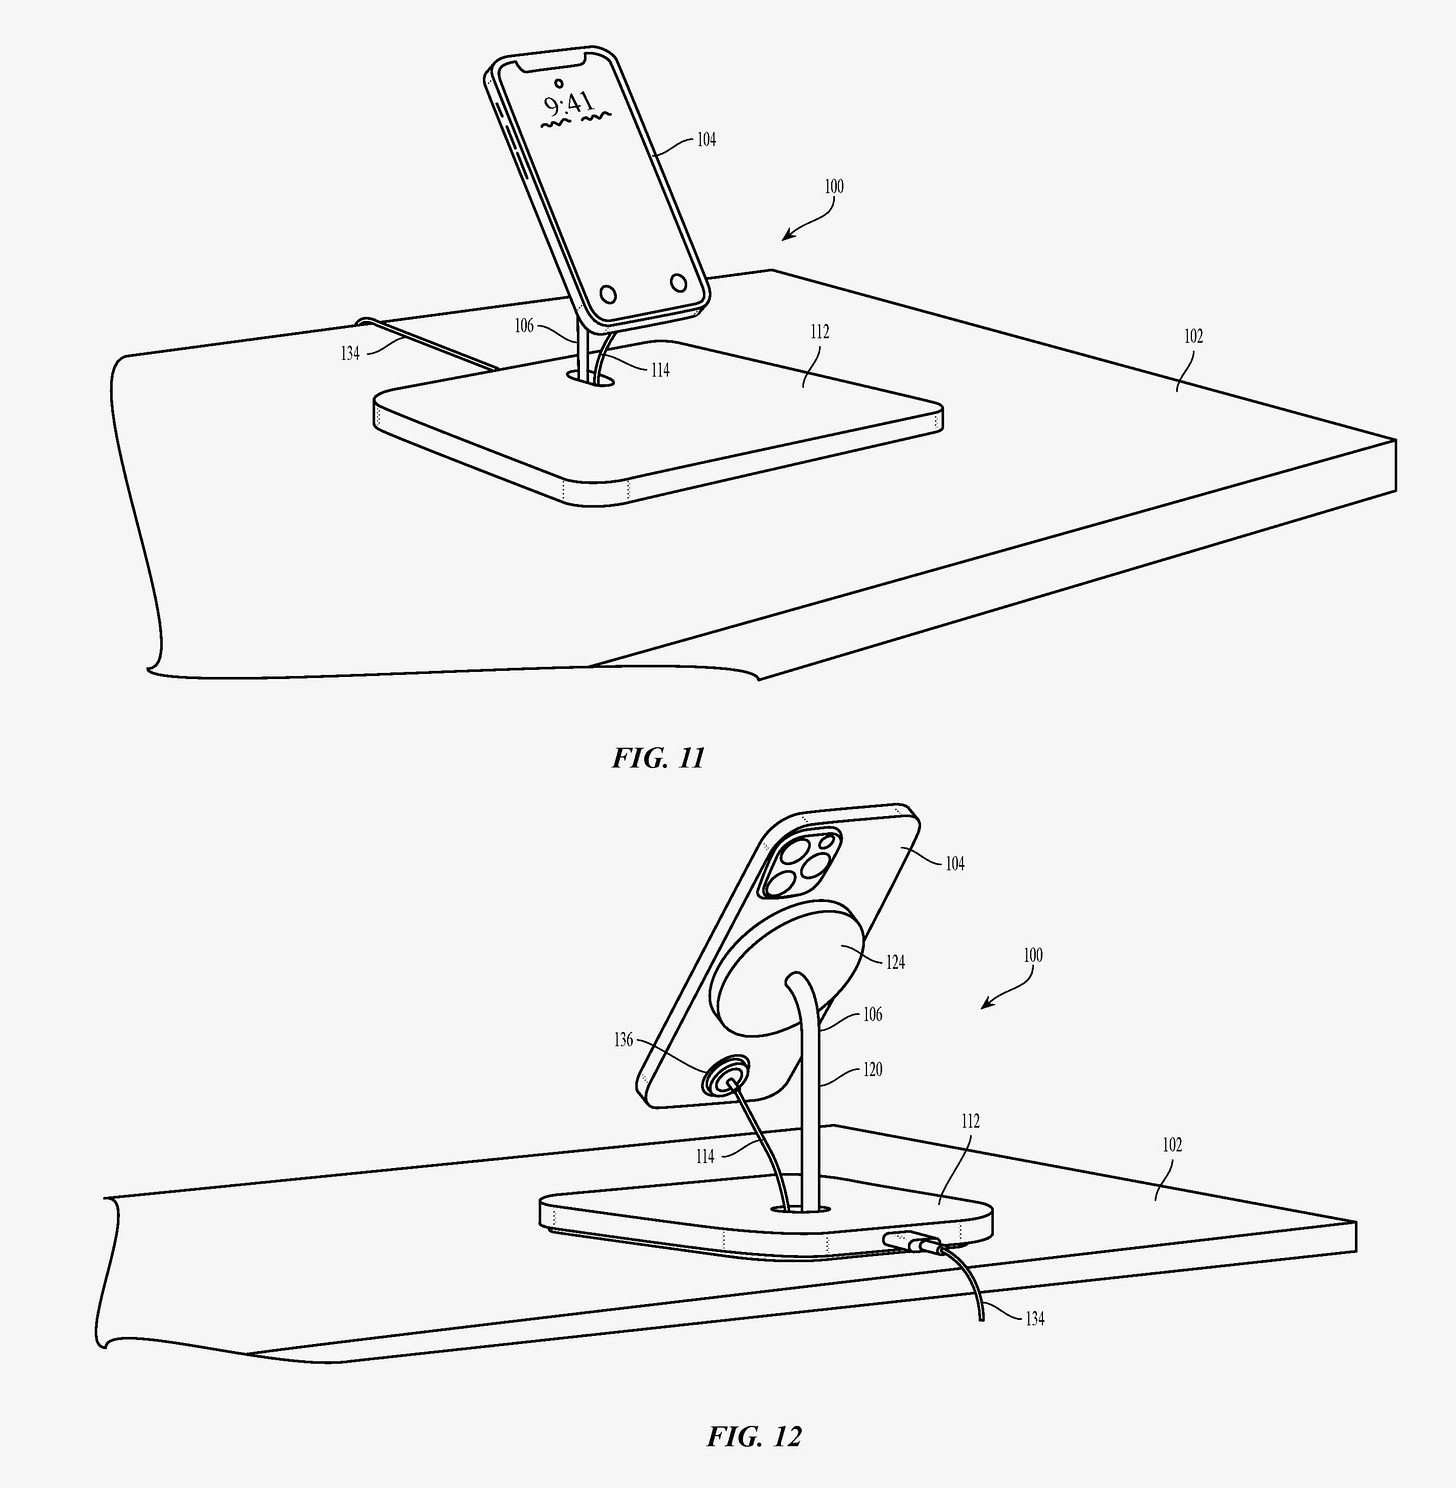 Patent drawings depict Apple's MagSafe dock.